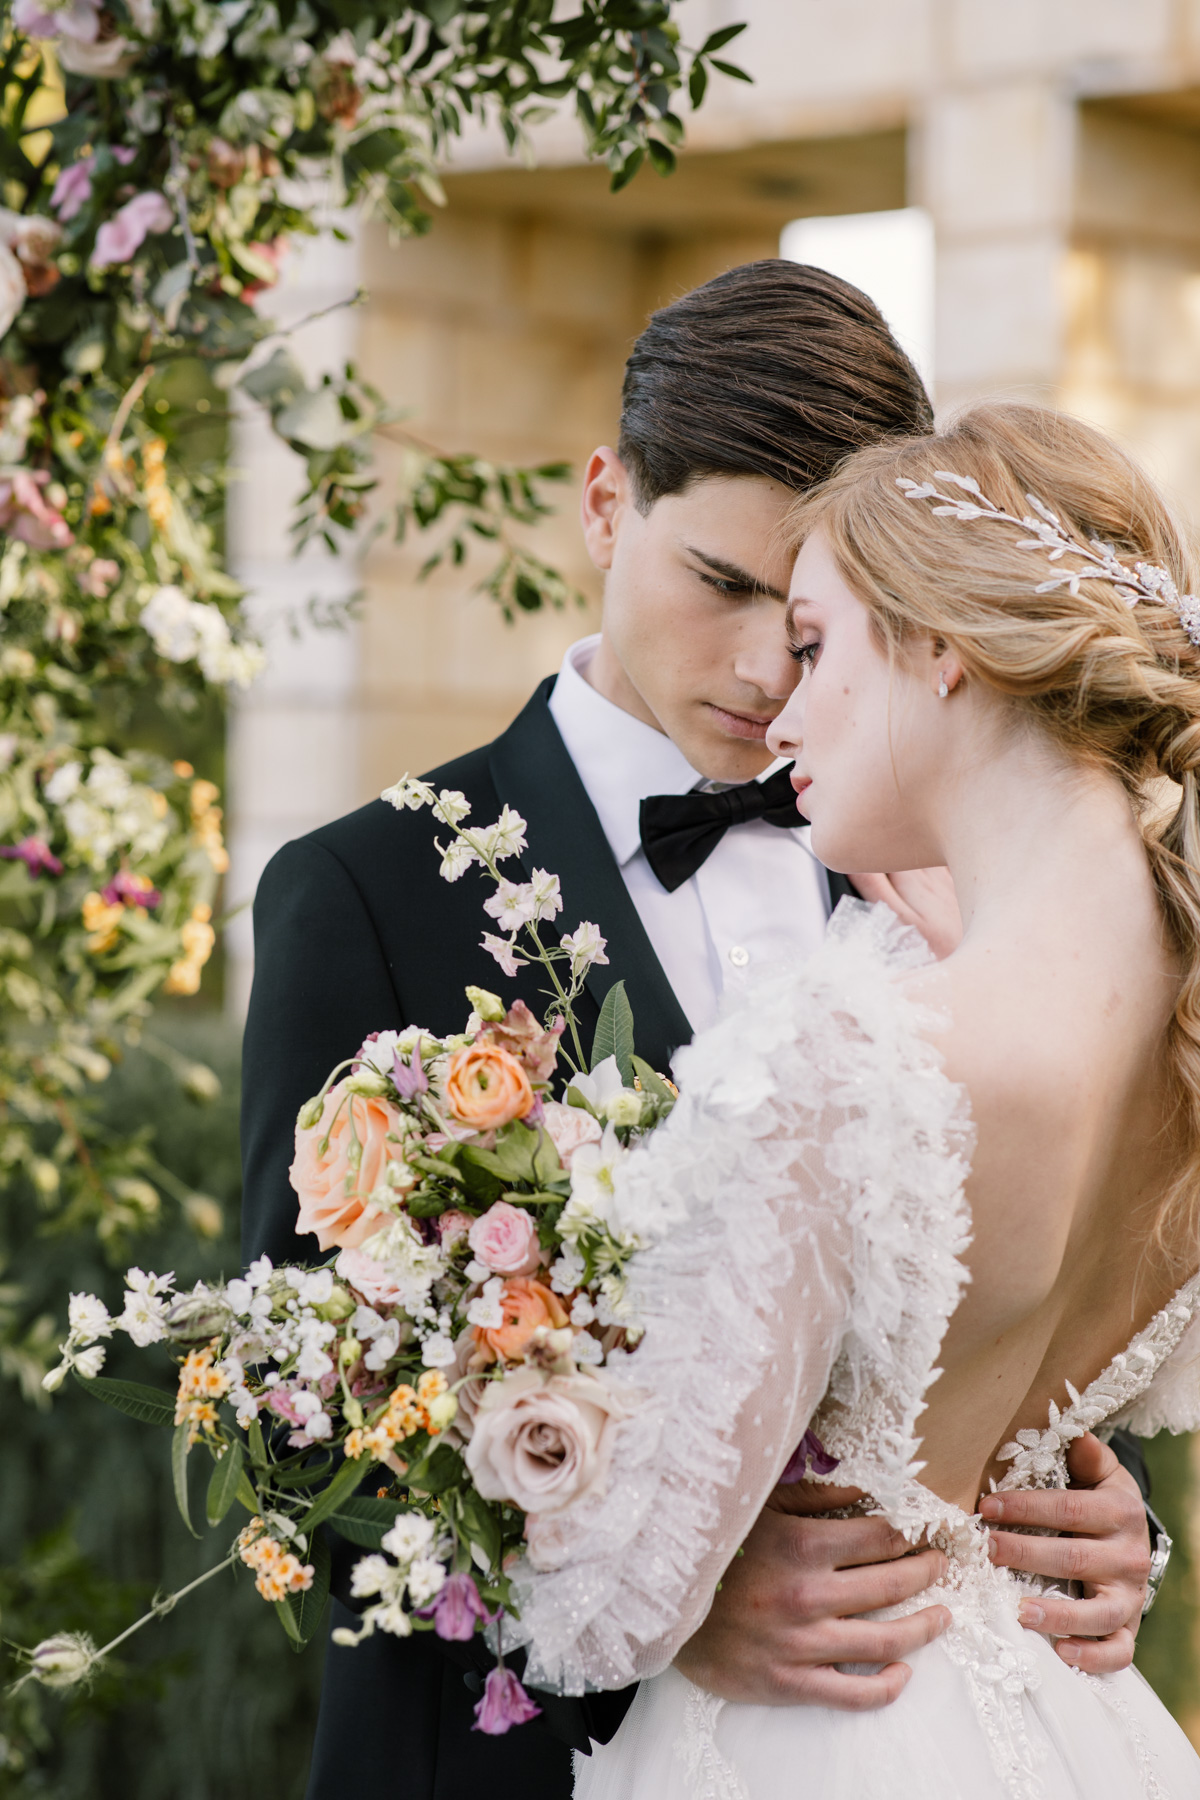 Elegant and timeless wedding inspiration in Greece 